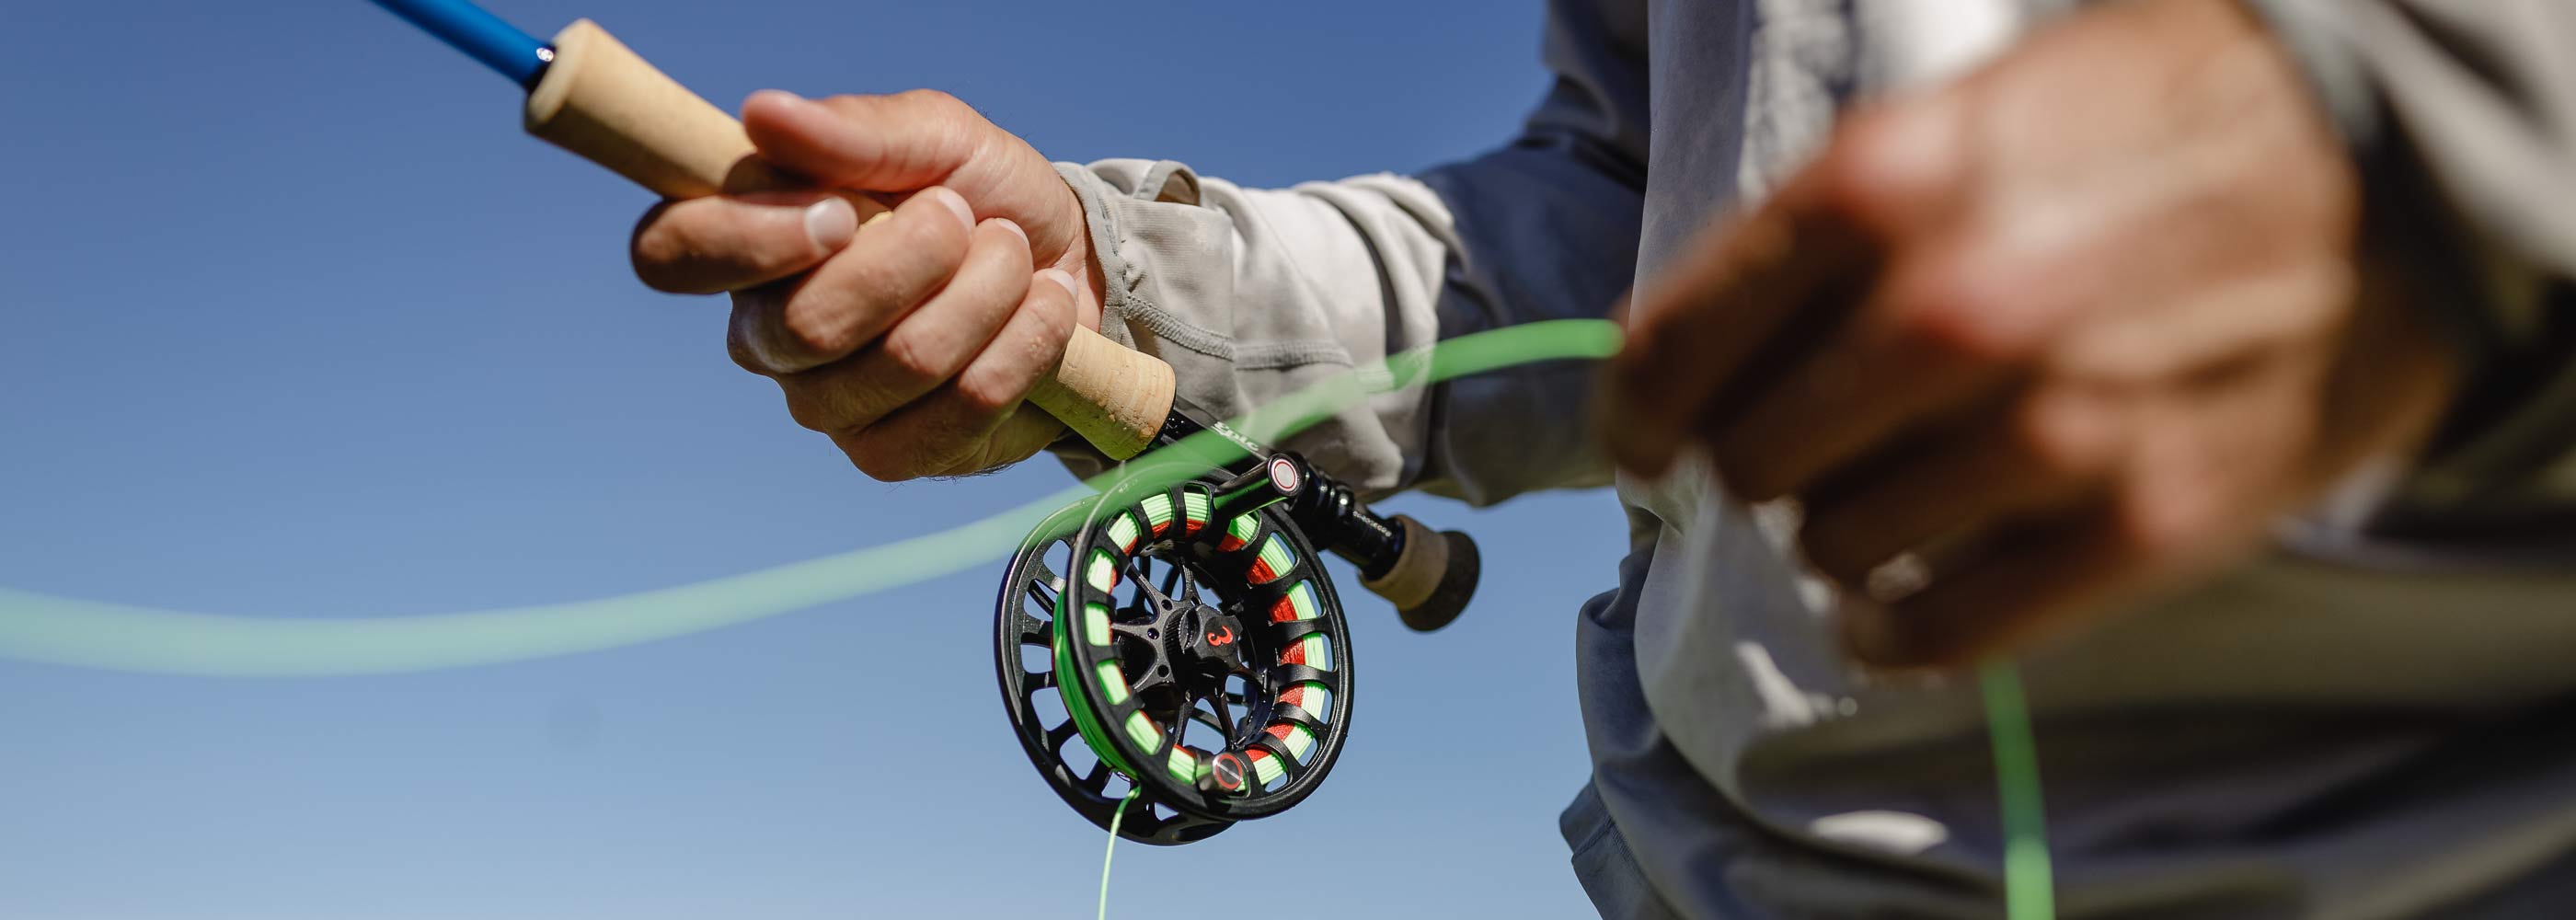 fly rod and reel combo deals for fly fishing, how to choose the best 5 weight fly rod